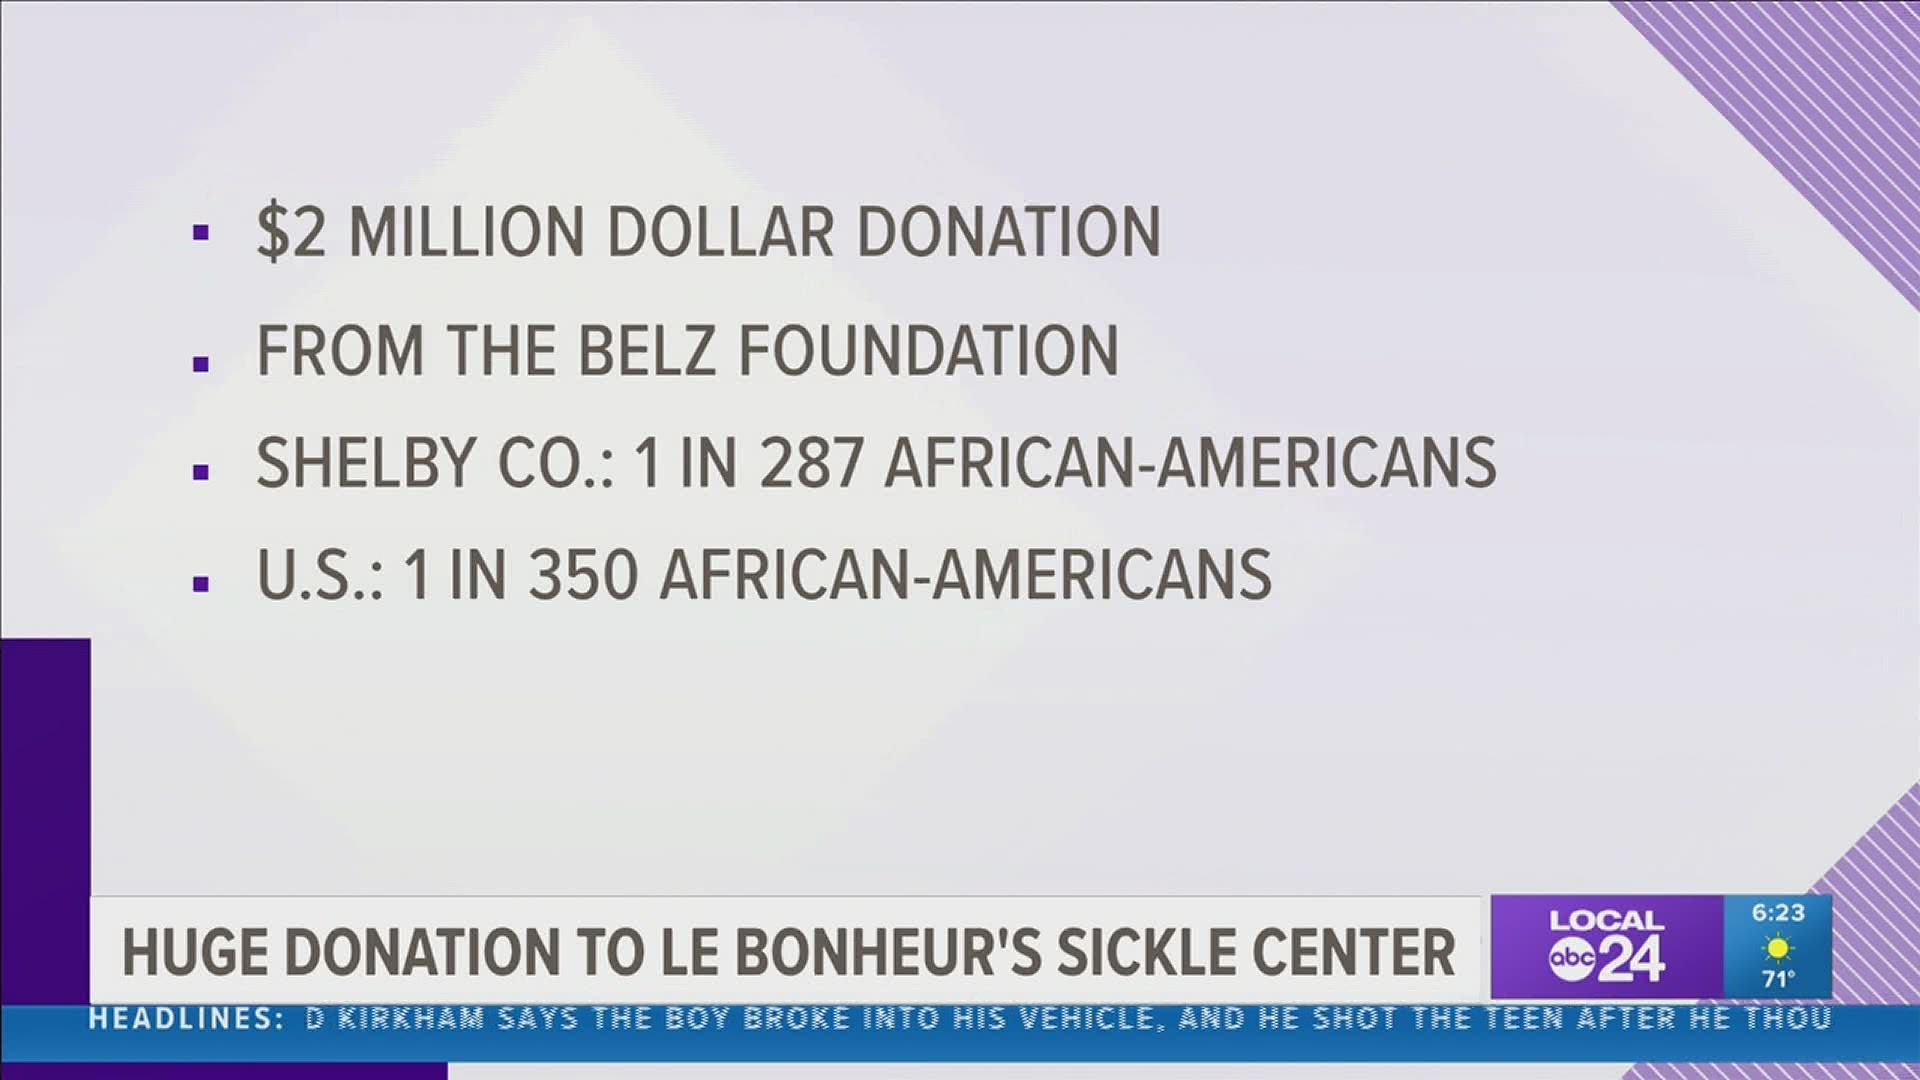 The Belz Foundation donated $2-million to the hospital’s comprehensive Sickle Cell Center program.